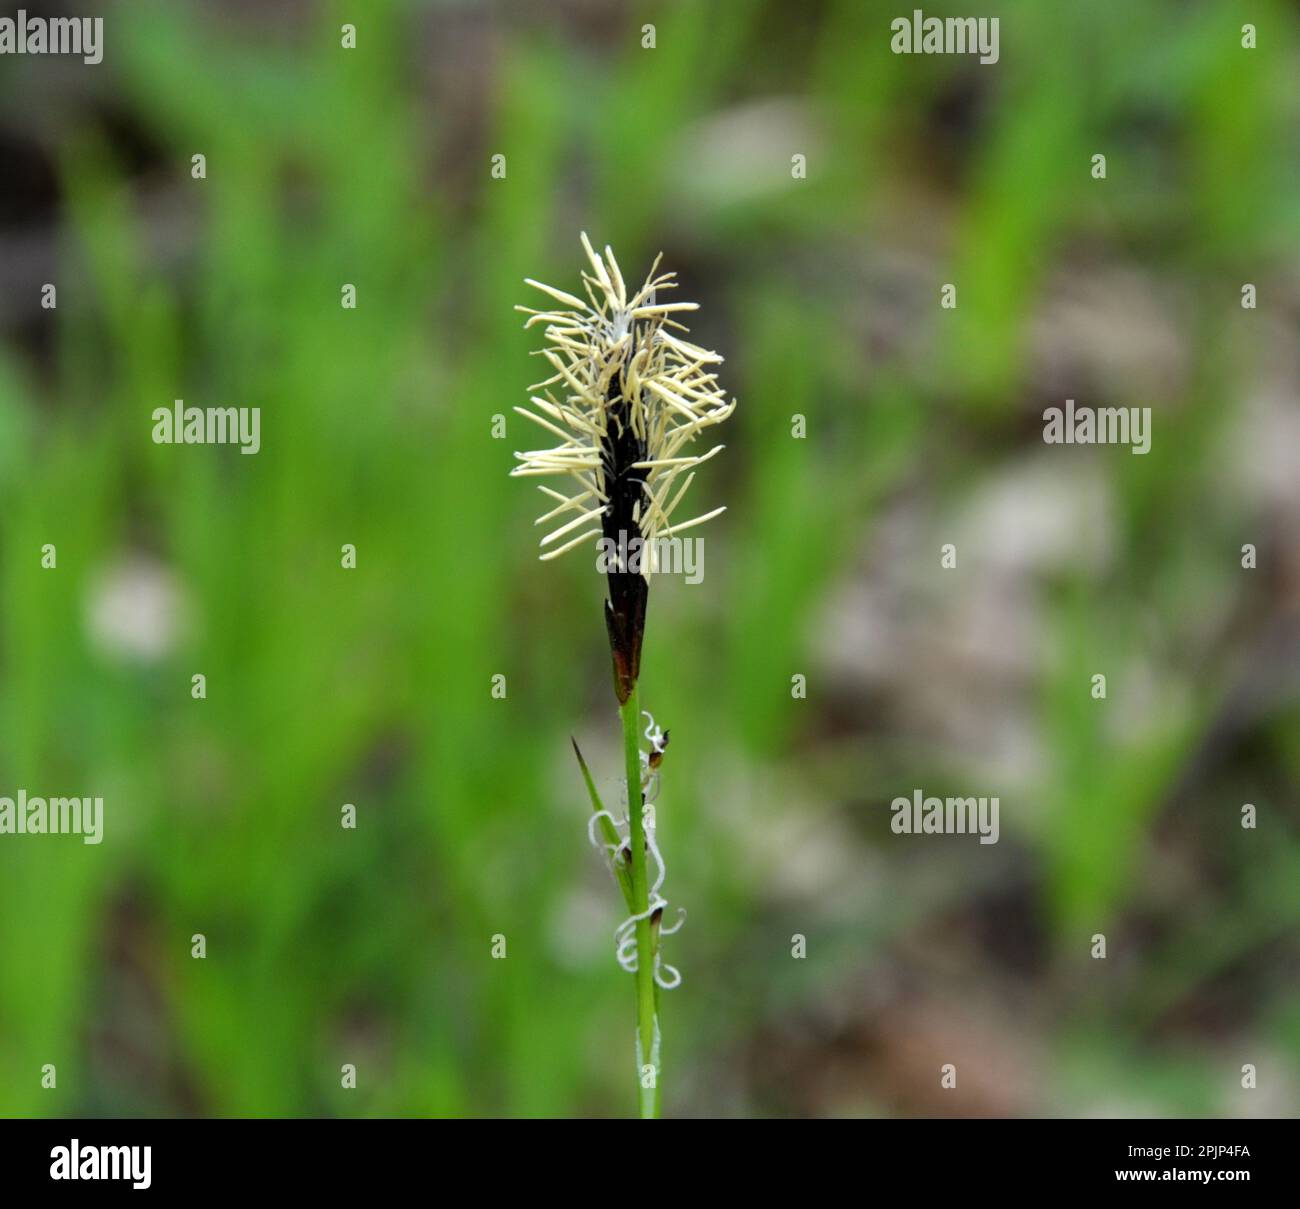 Hairy sedge (Carex pilosa) grows in the wild in the forest Stock Photo